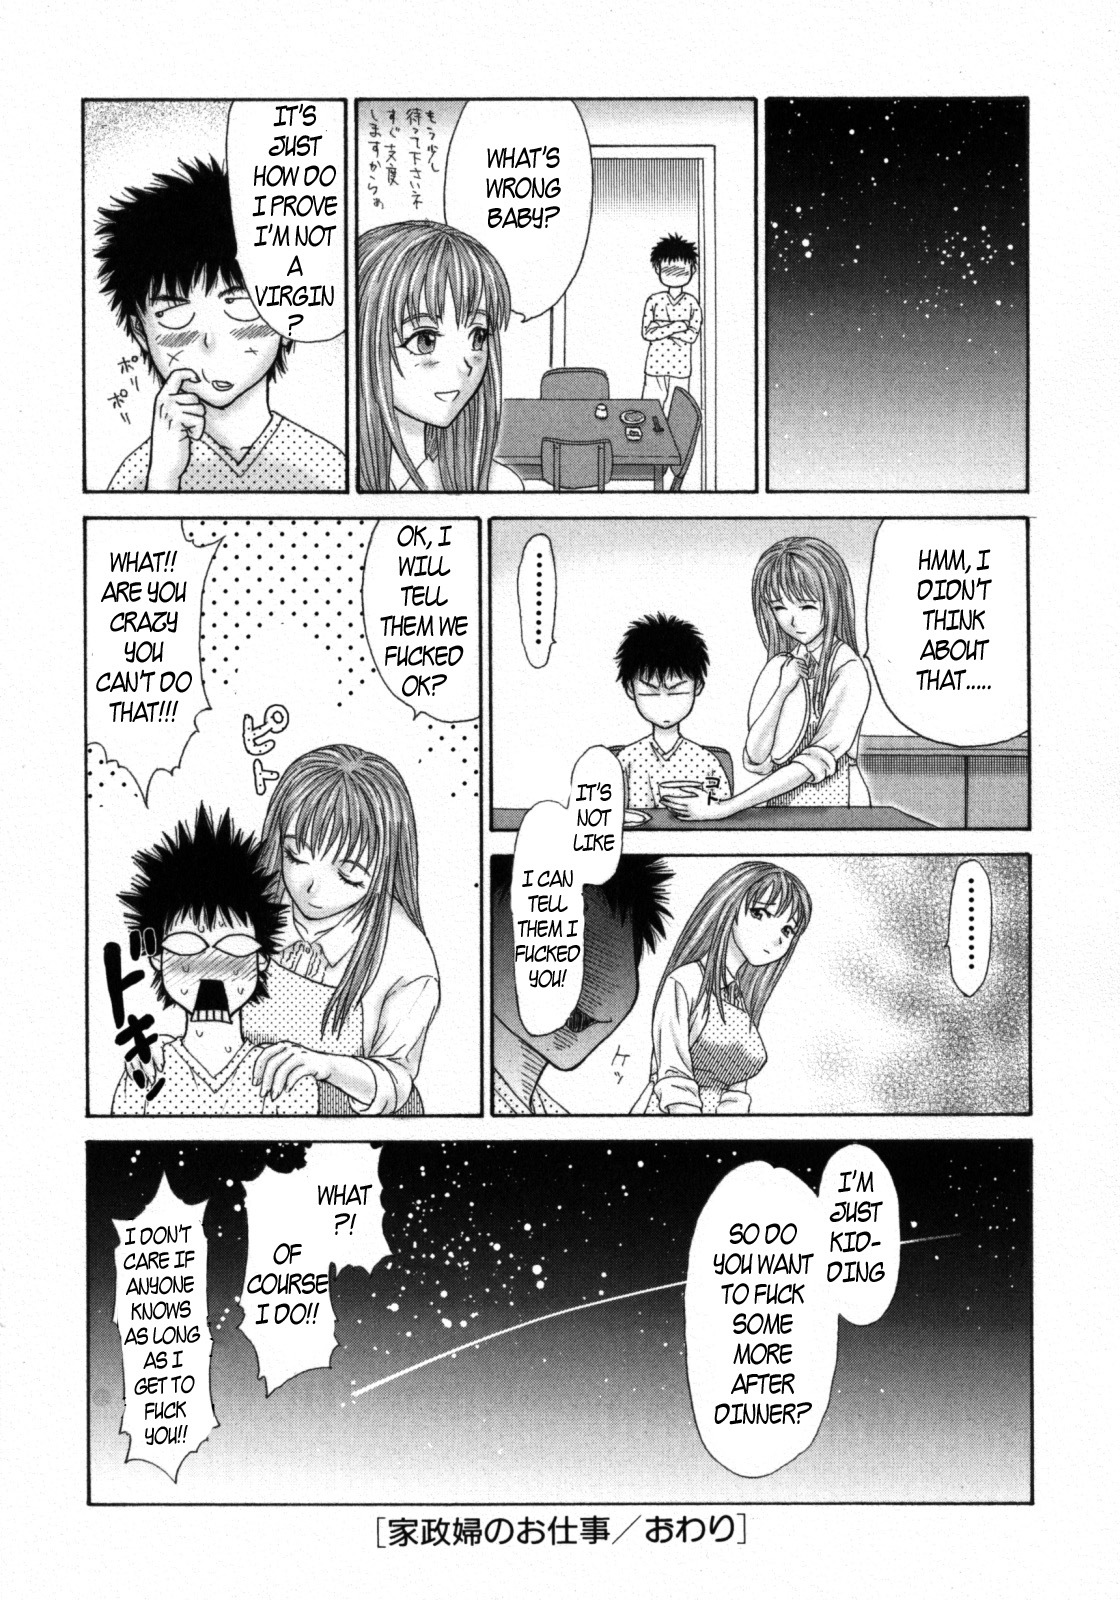 Concerned Mother [English] [Rewrite] [EZ Rewriter] page 16 full